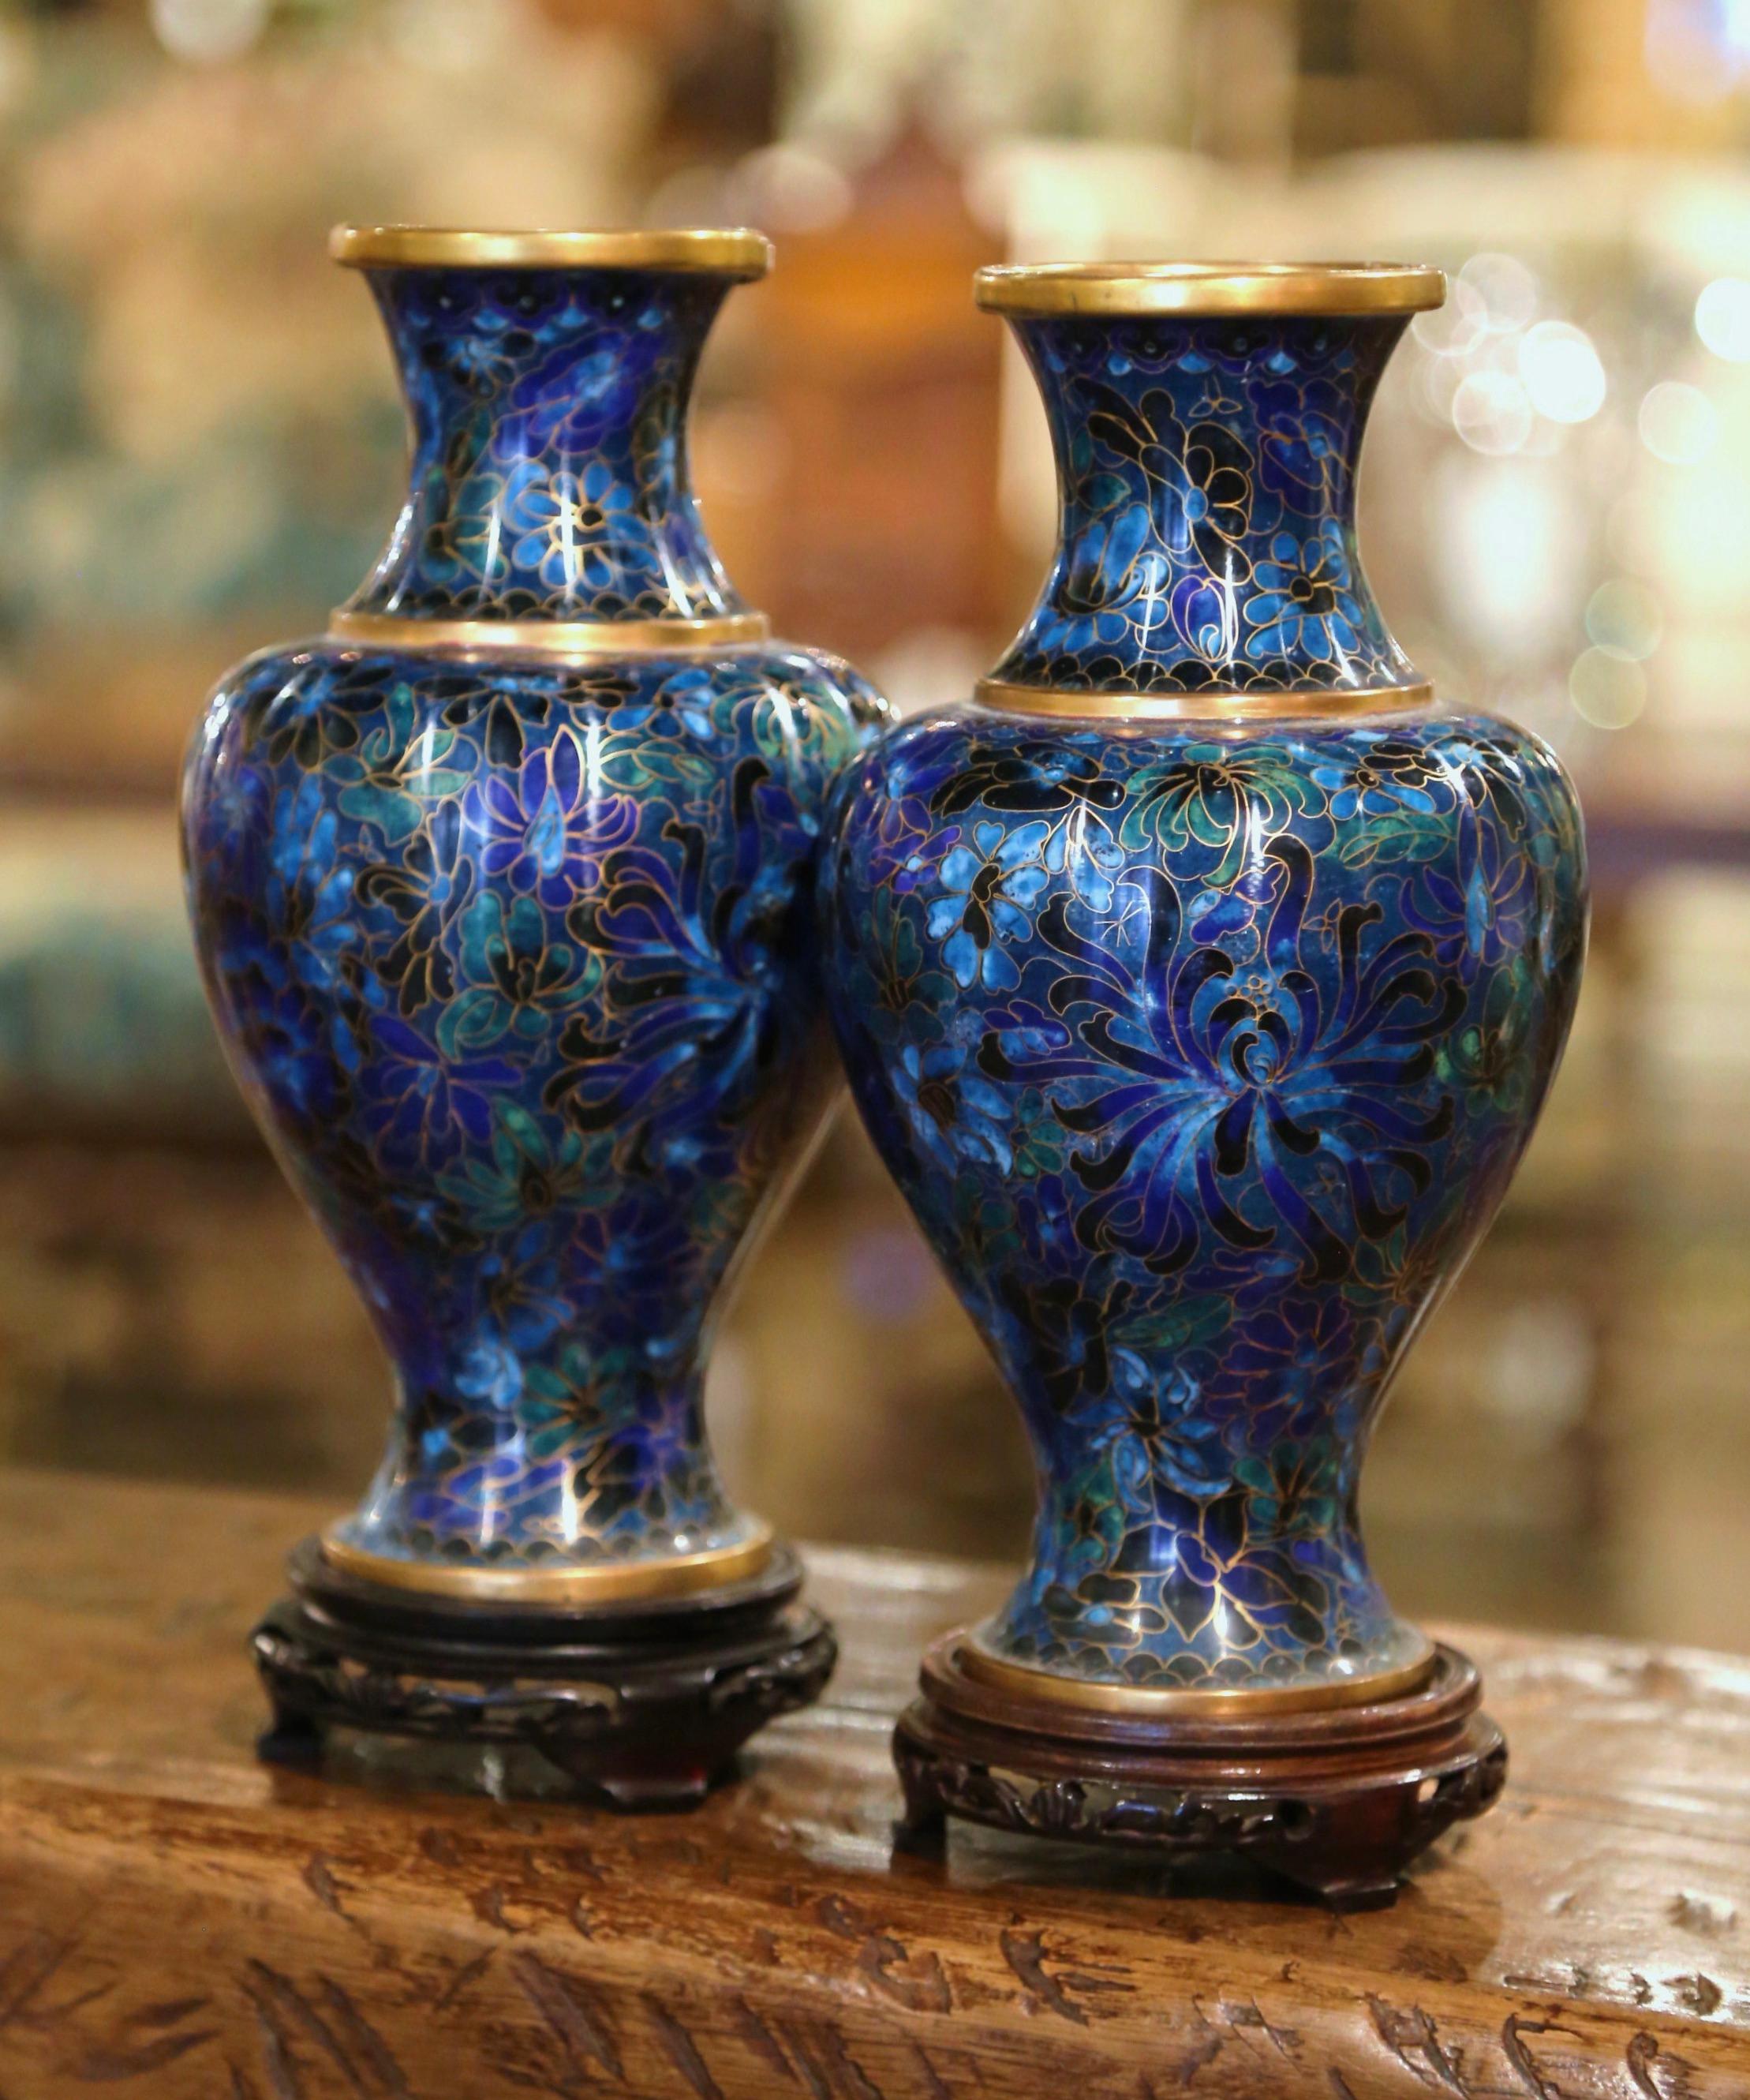 Decorate a mantel with this colorful pair of baluster vases; created in China circa 1980, each vase sits on a carved ebonized wood stand and features floral motifs in the cloisonné technique (decorative work in which enamel, glass, or gemstones are